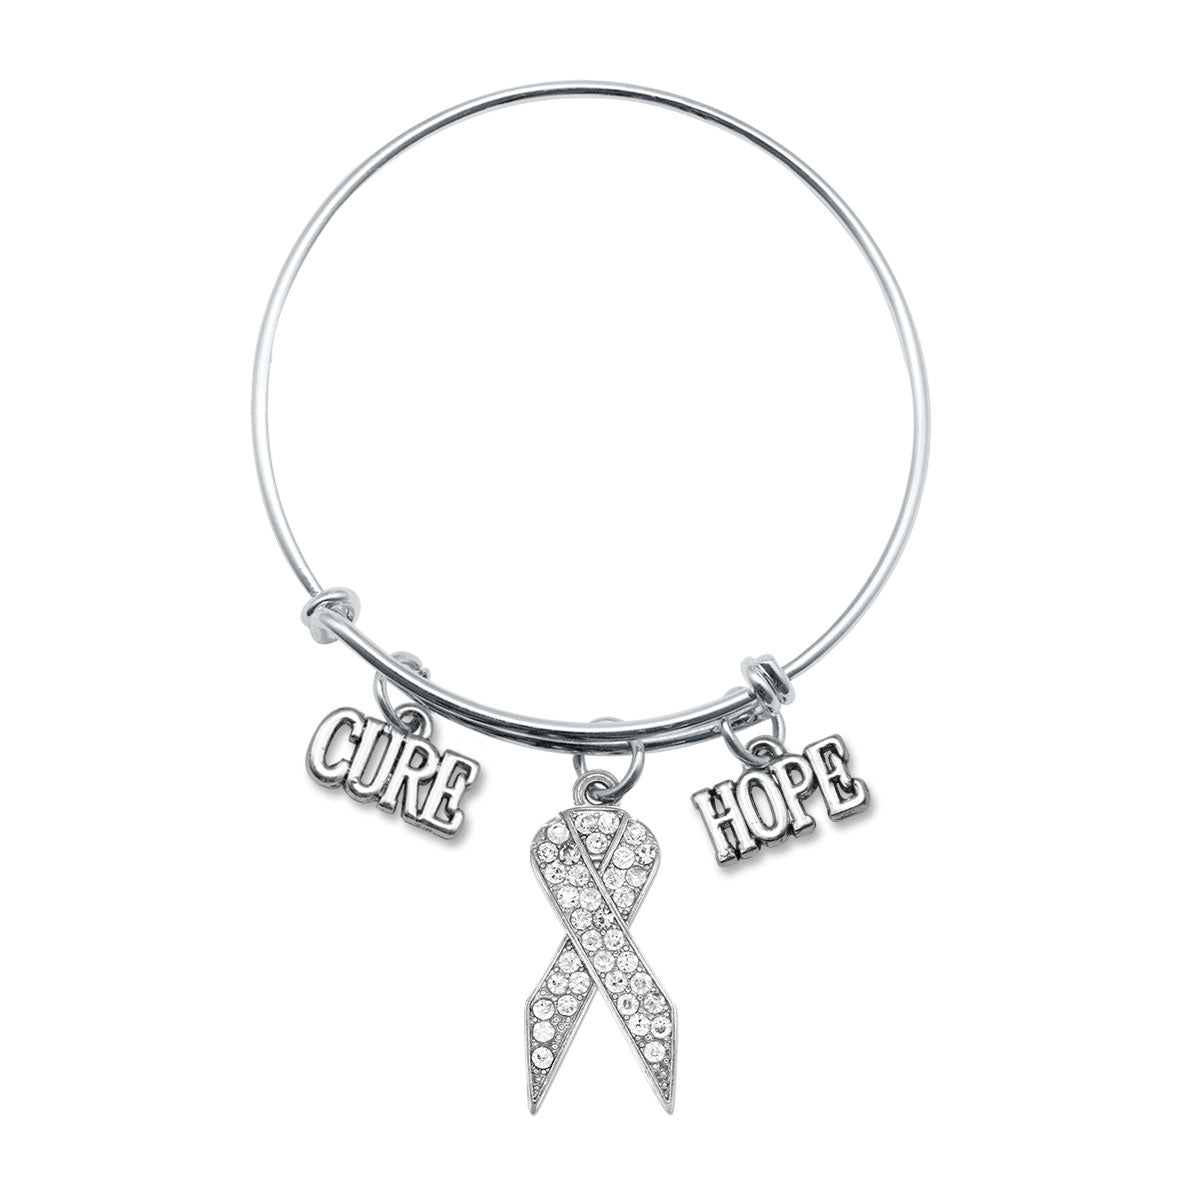 Silver Hope Clear Awareness Ribbon Charm Wire Bangle Bracelet